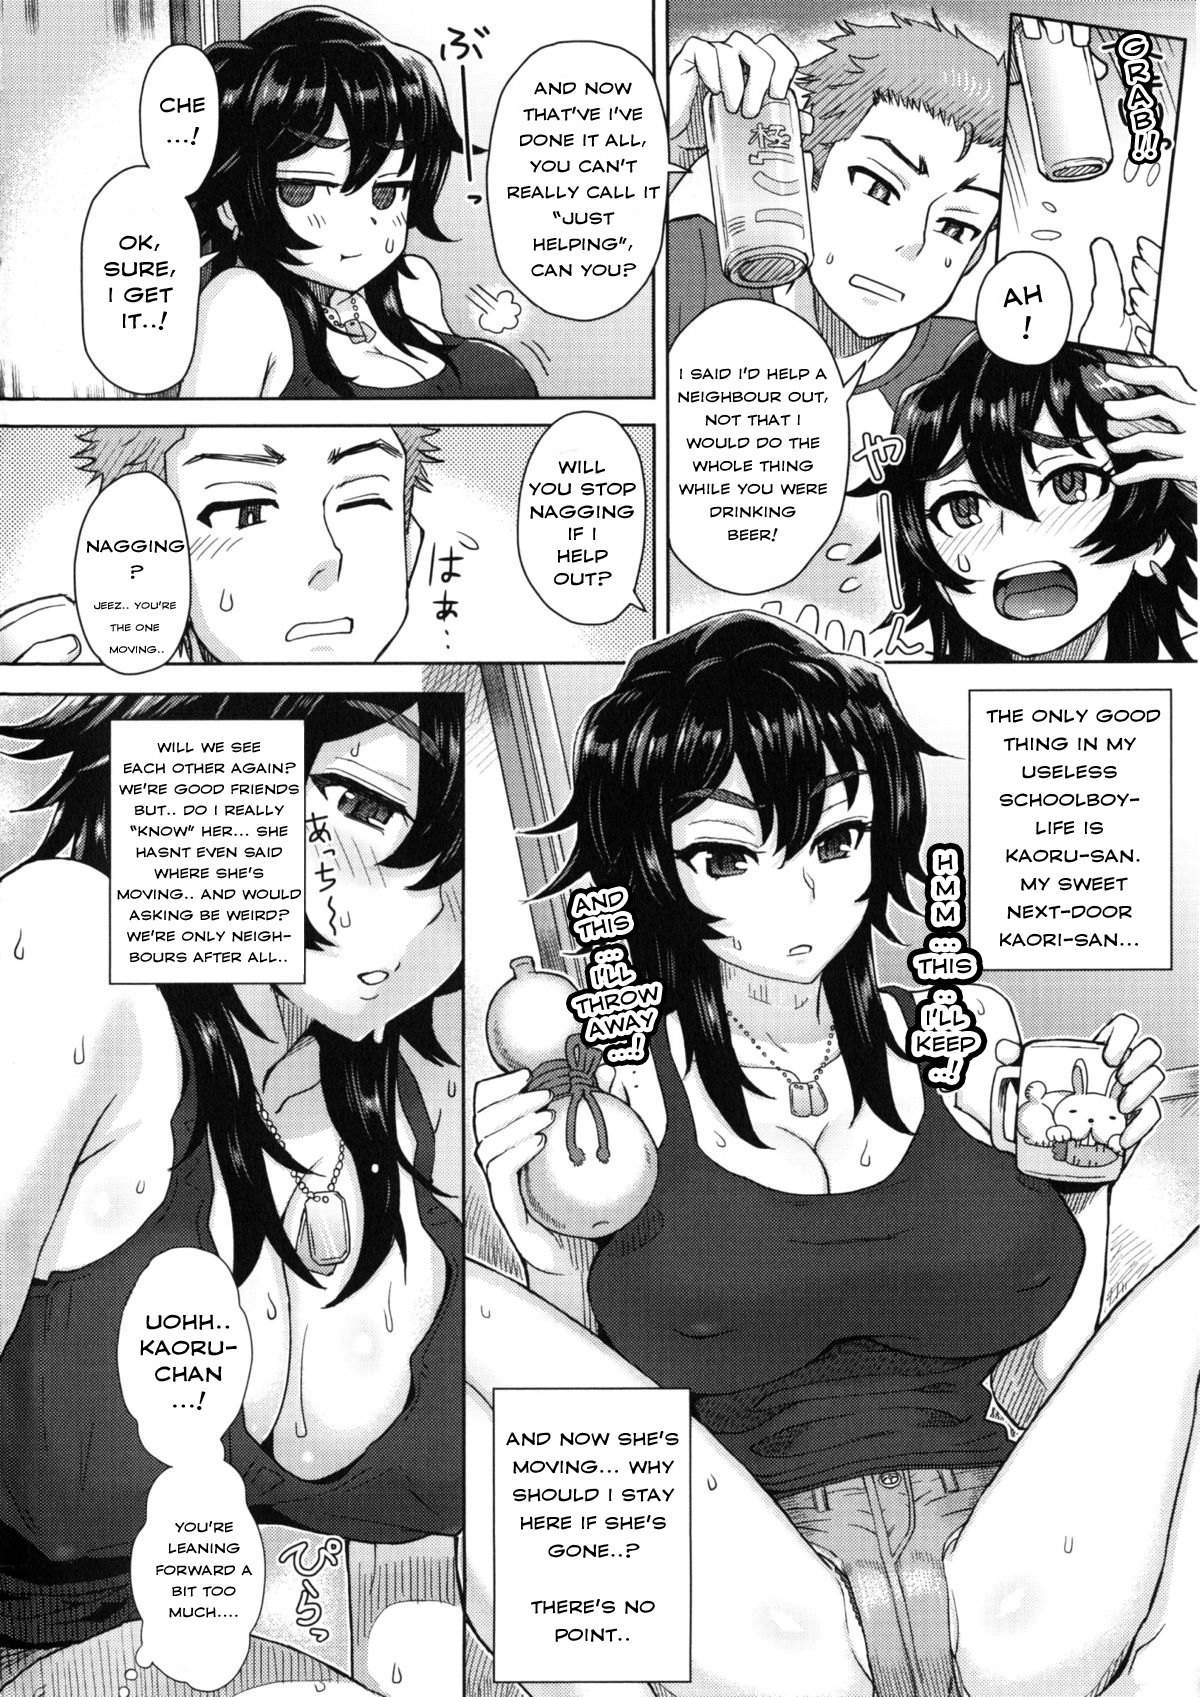 [Itou Eight] The Situation with the Young Girl Next Door Moving in [English] page 2 full